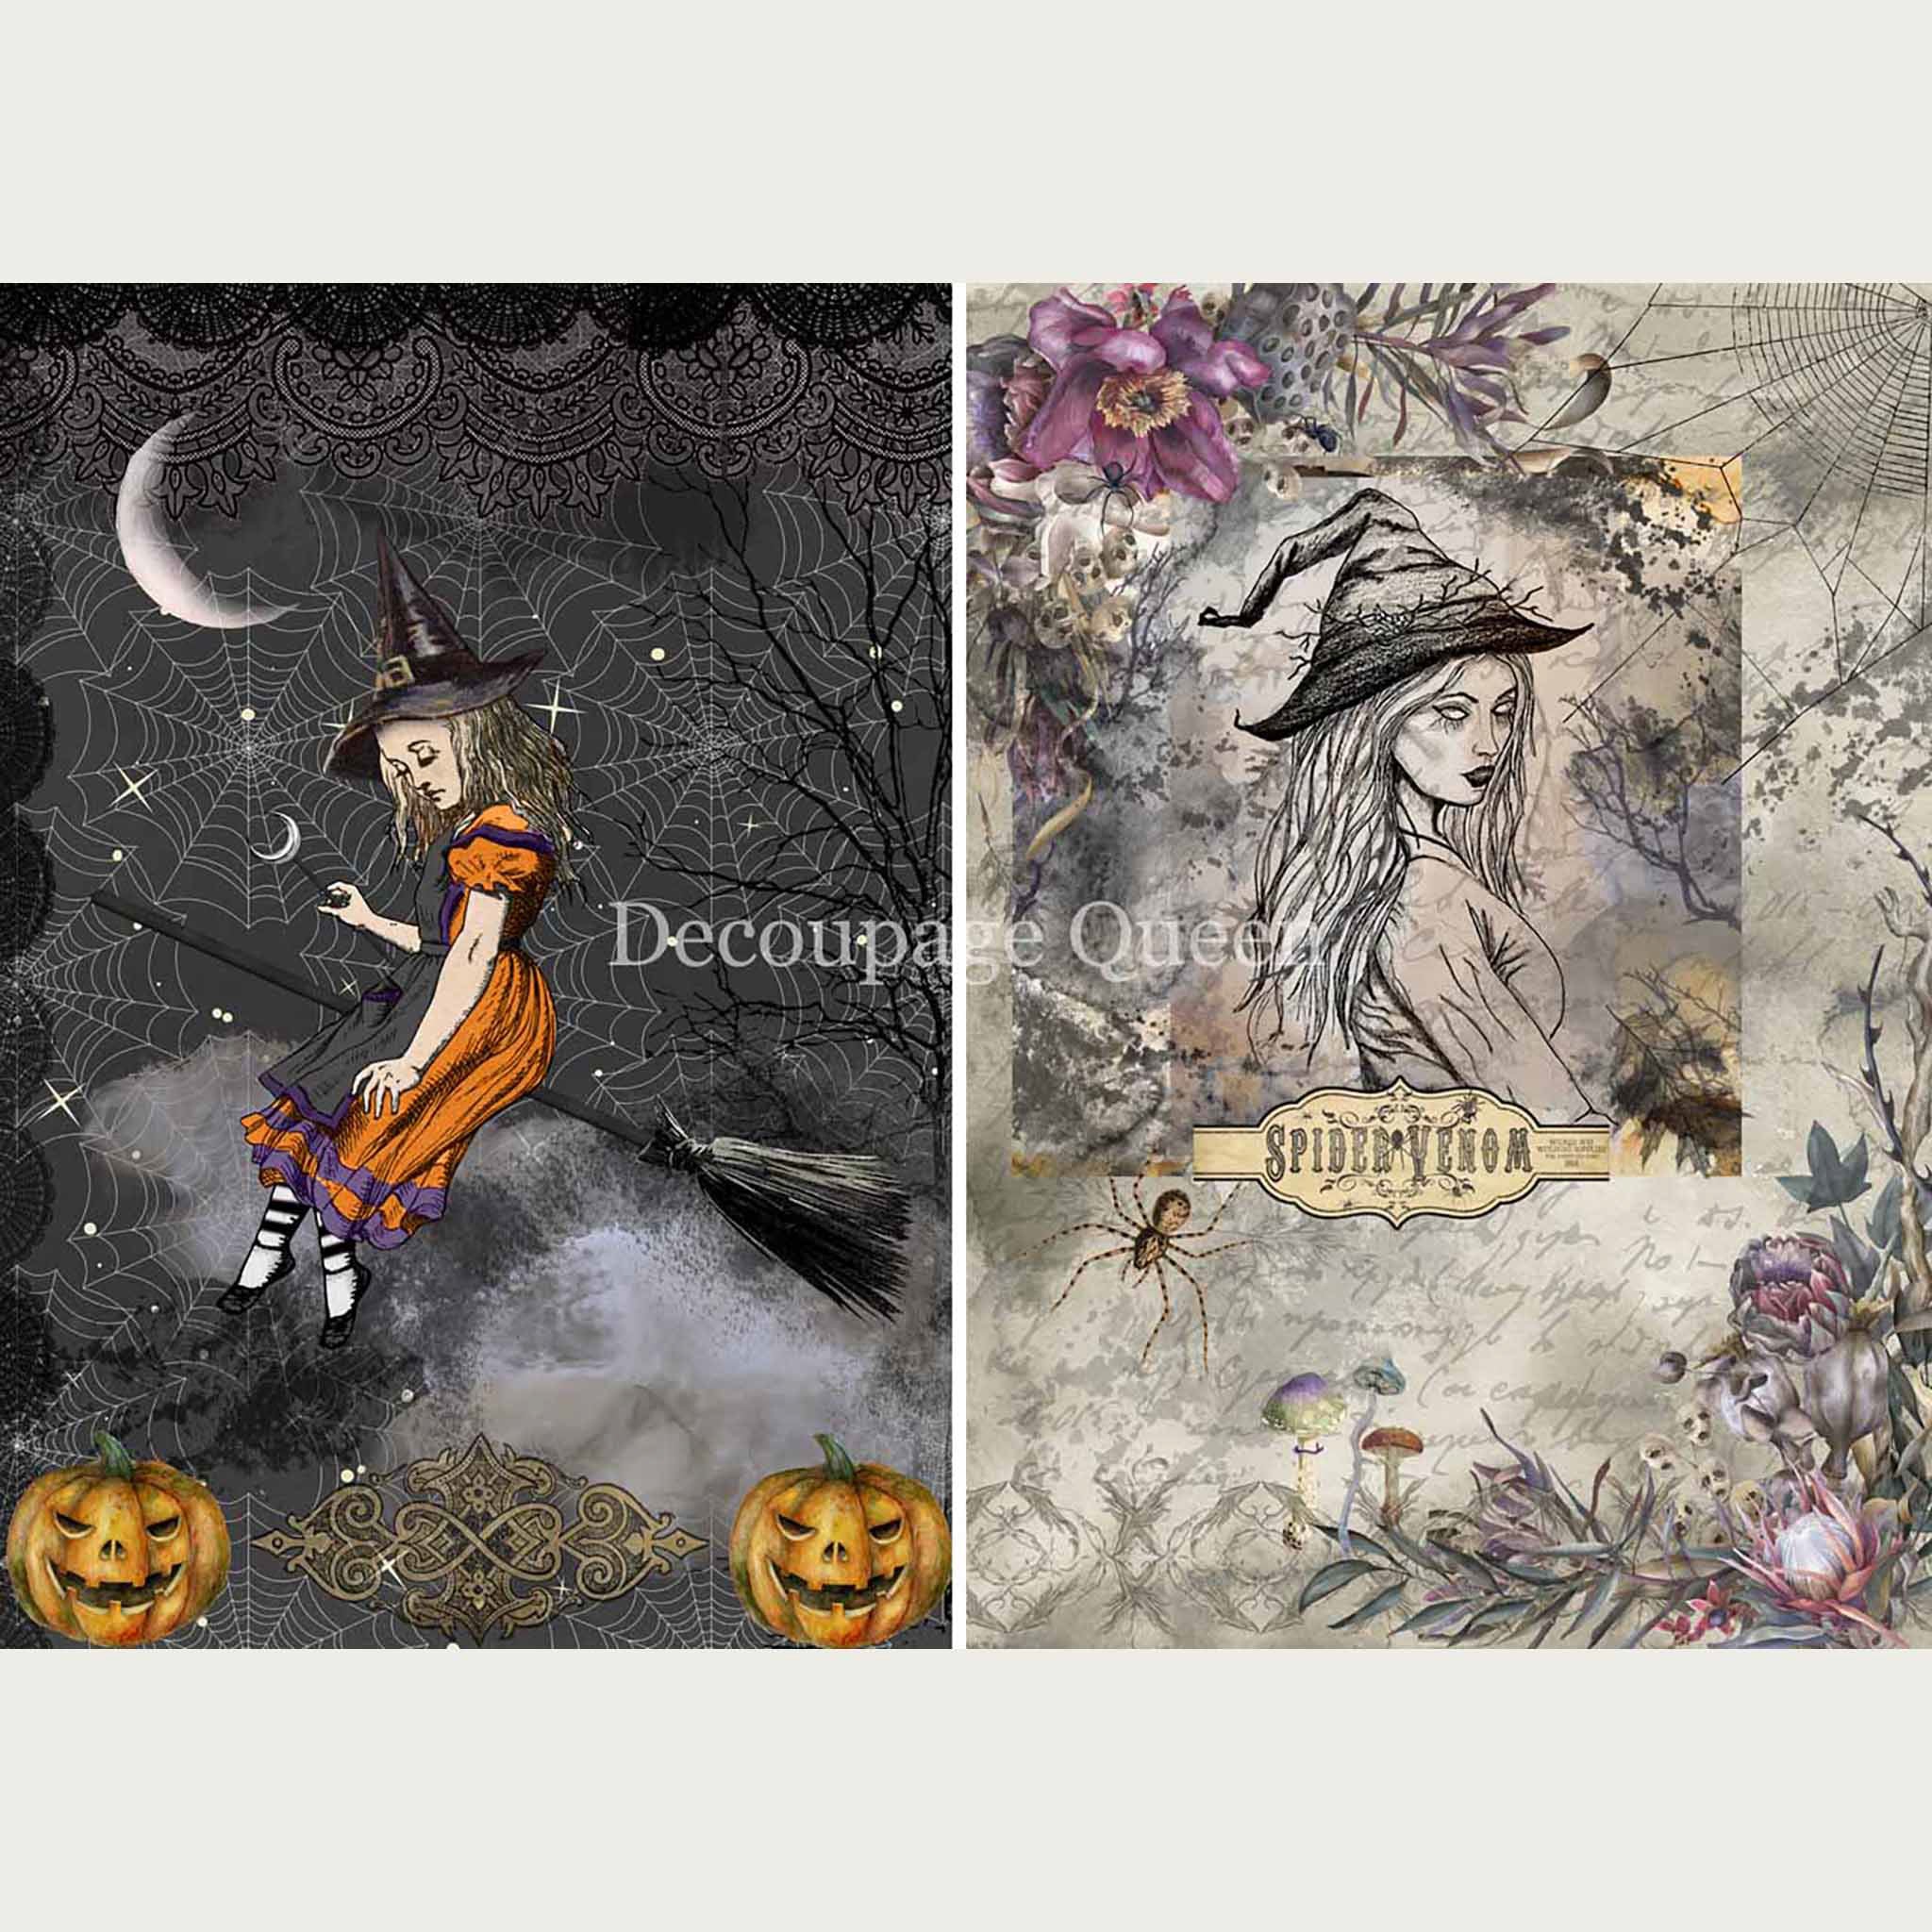 Rice paper featuring two vintage scenes of mystical witches set against spooky backgrounds. White borders are on the top and bottom.